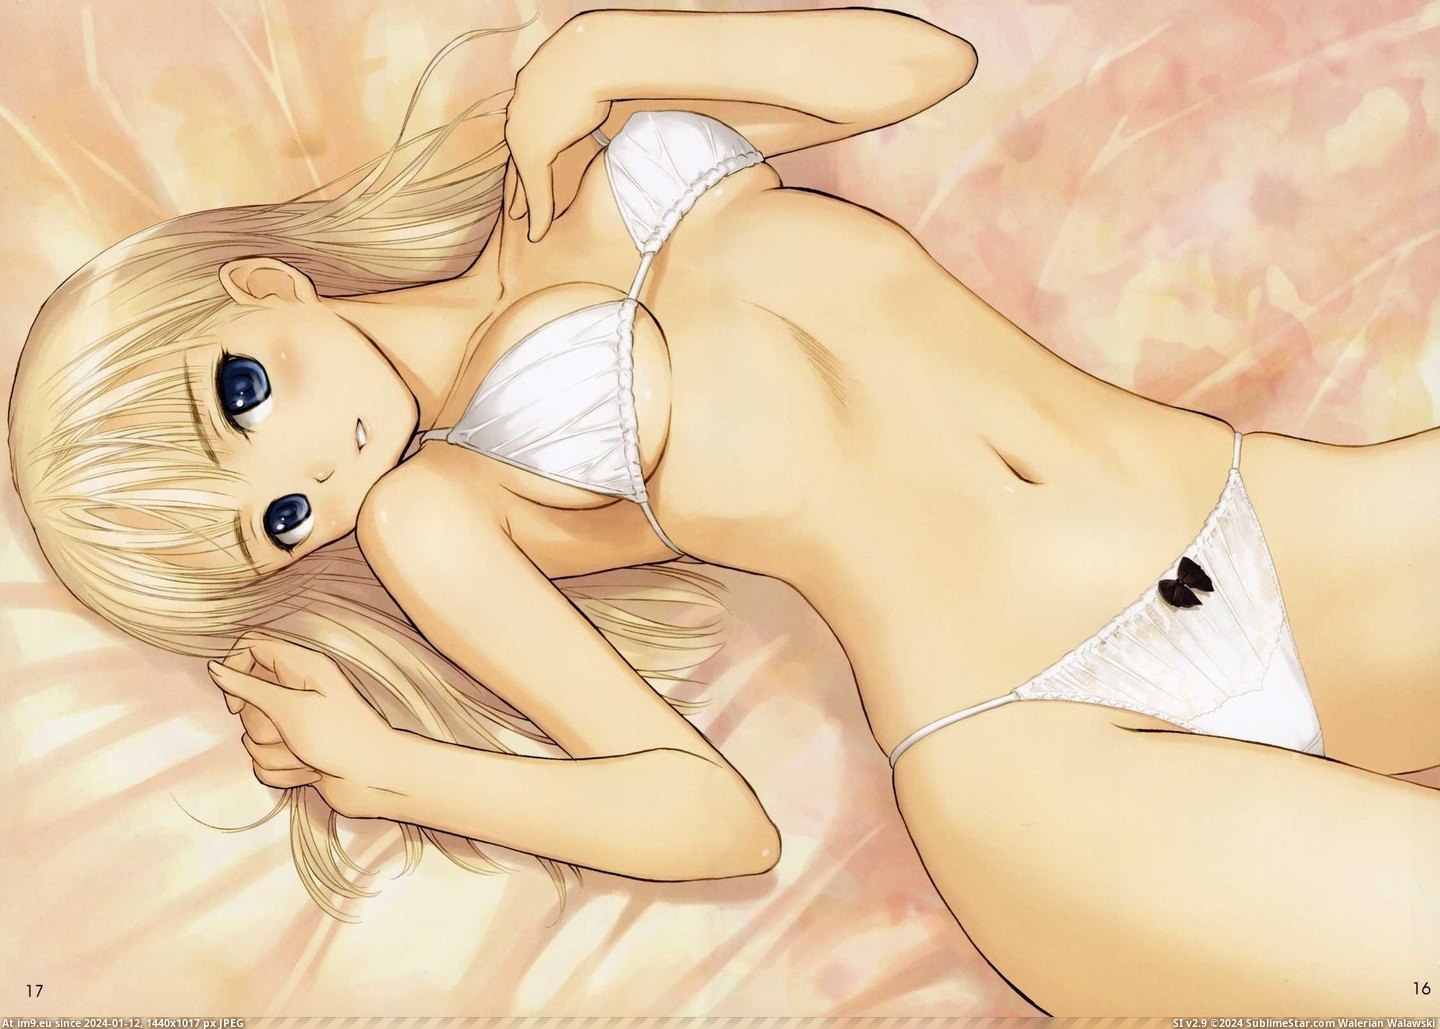 #Sexy #Anime #Wallpapers #Girls 15 Best Sexy Anime Girls Hd Wallpapers 2560 X 1600 (anime image) Pic. (Bild von album Anime wallpapers and pics))